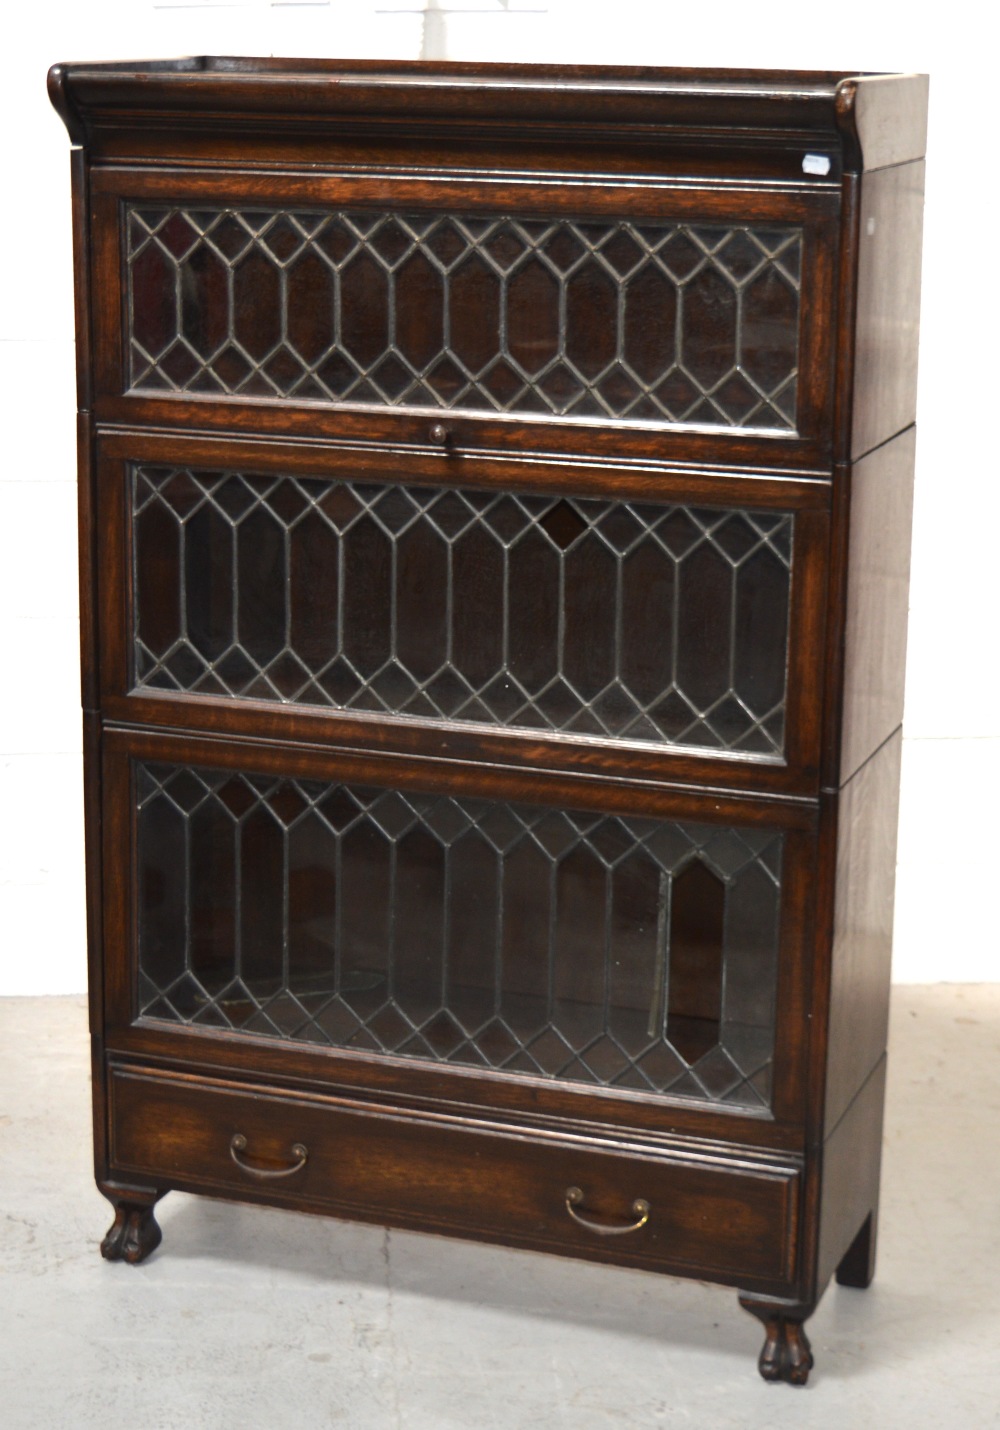 An early 20th century Globe-Wernicke style oak three tier bookcase with astragal glazed lift-up